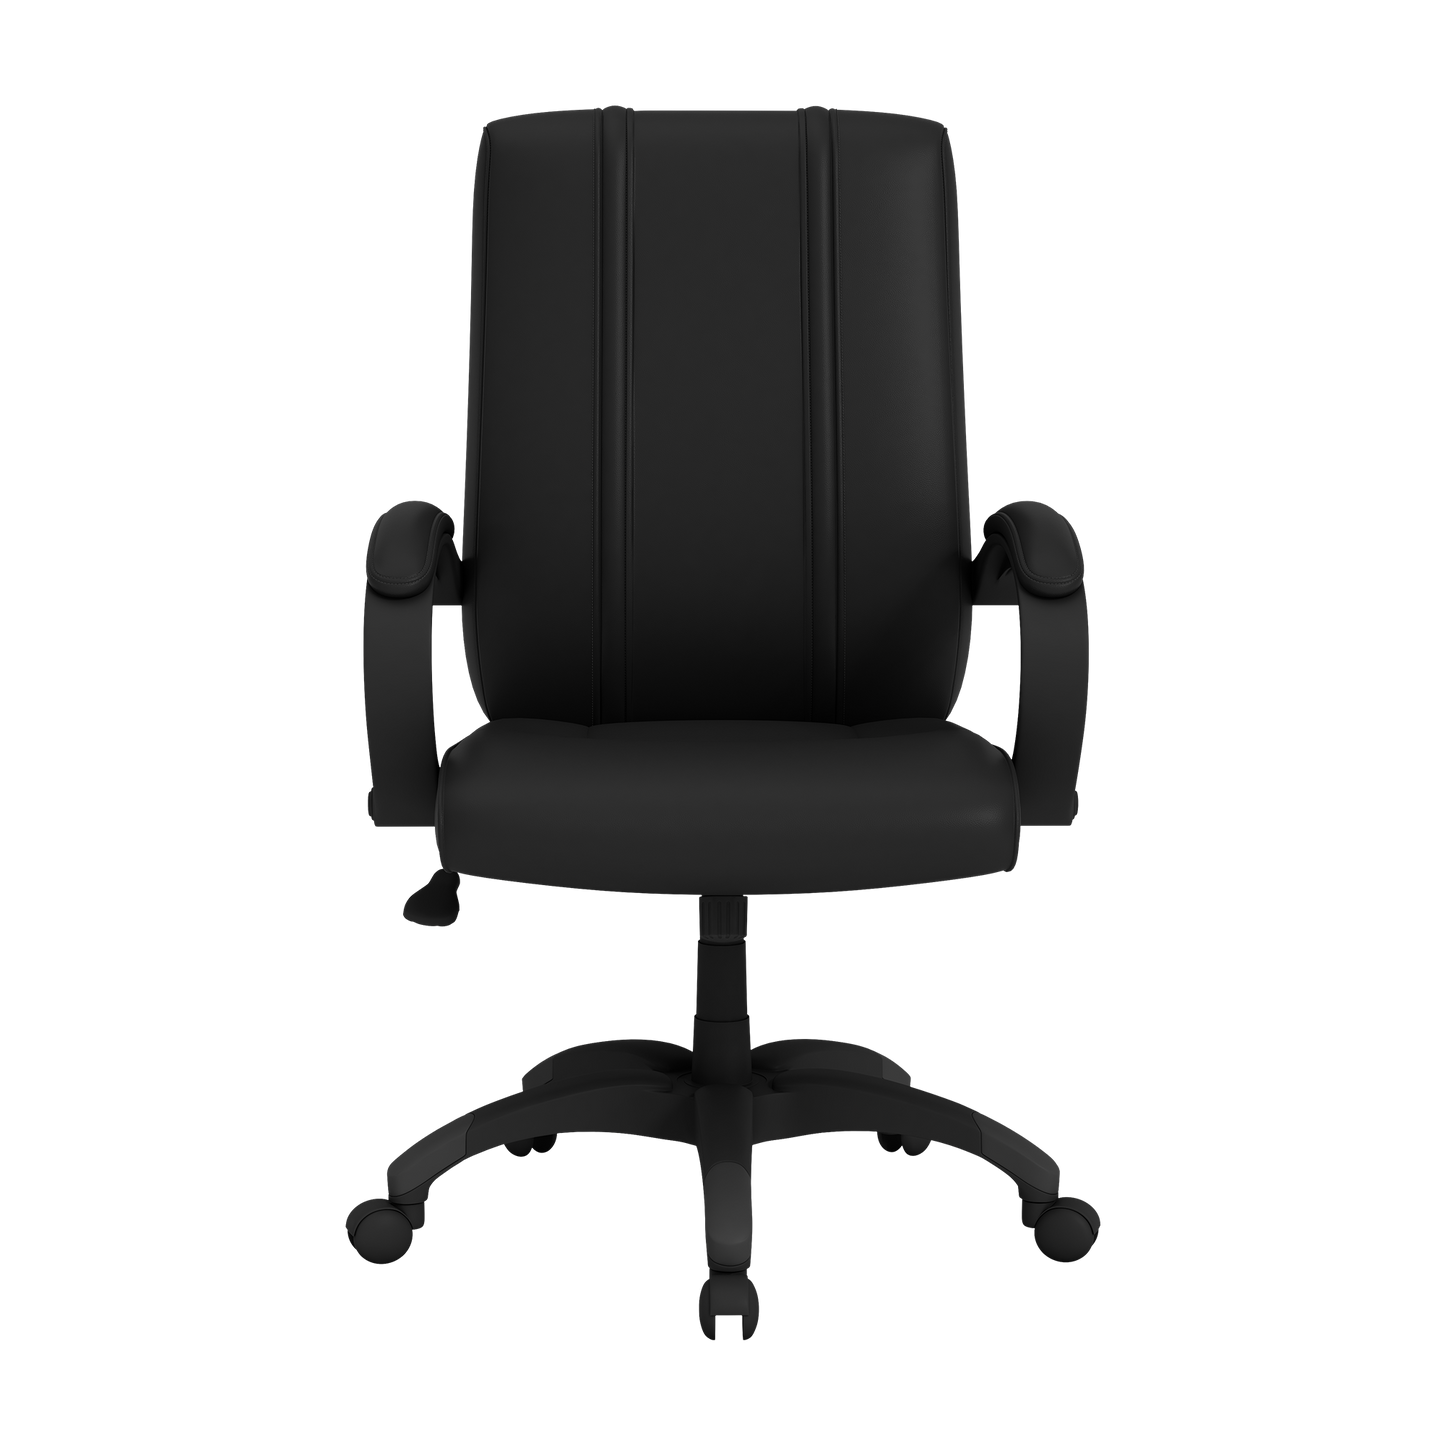 Office Chair 1000 with Los Angeles Angels Logo